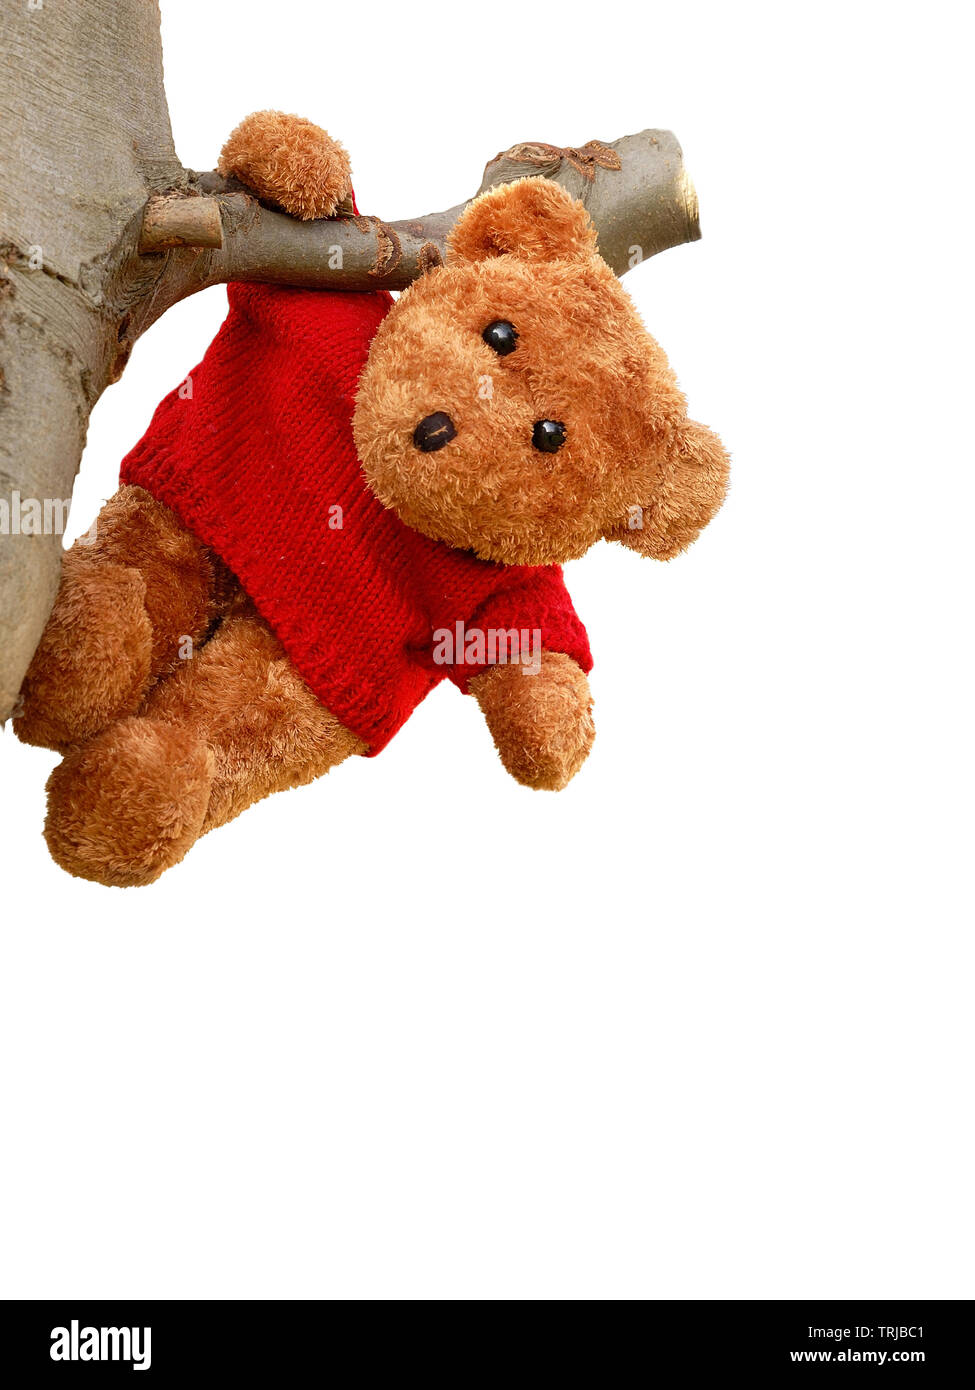 Little Teddy bear wearing a red pullover hanging from a tree branch, on an isolated white background. Stock Photo